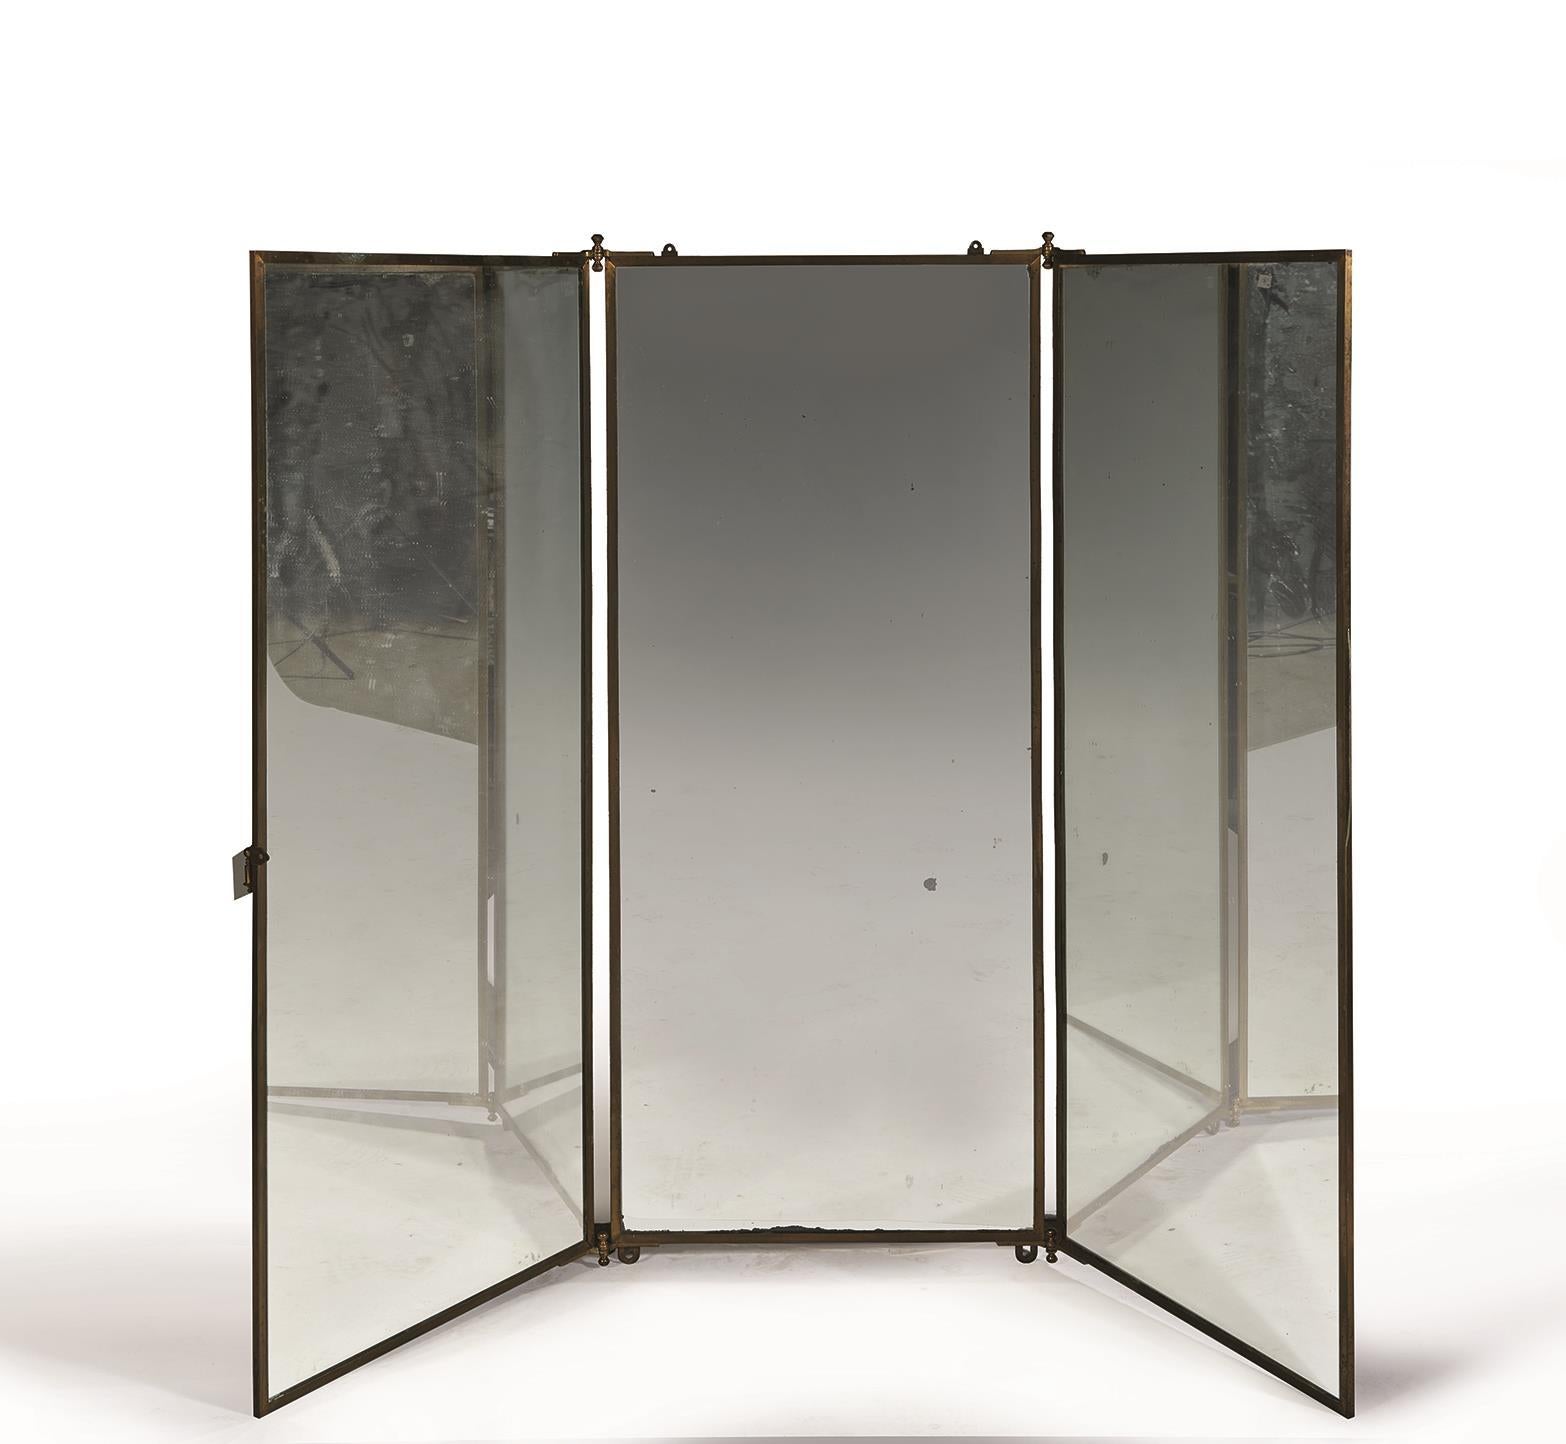 Brot Miroirs (Established 1826).
A dressing mirror, circa 1940.
Three folding panels in a brass frame, with two wall fixtures to the top of the central mirror.

Each panel: 51 1/4 in. (130 cm.) high; 21 3/4 in. (55 cm.) wide 
The whole,